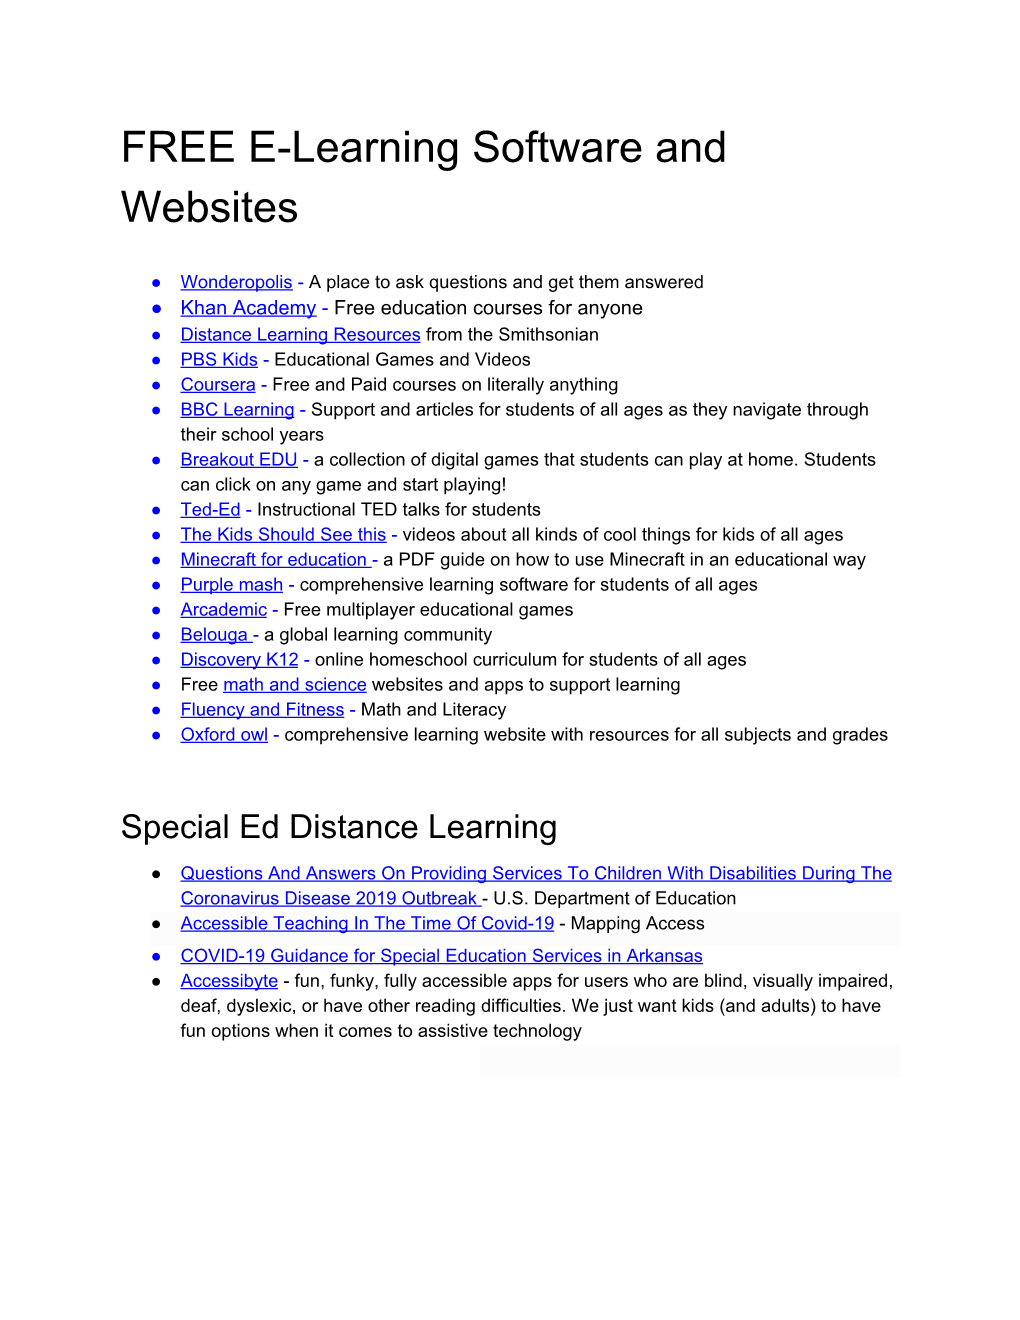 FREE E-Learning Software and Websites